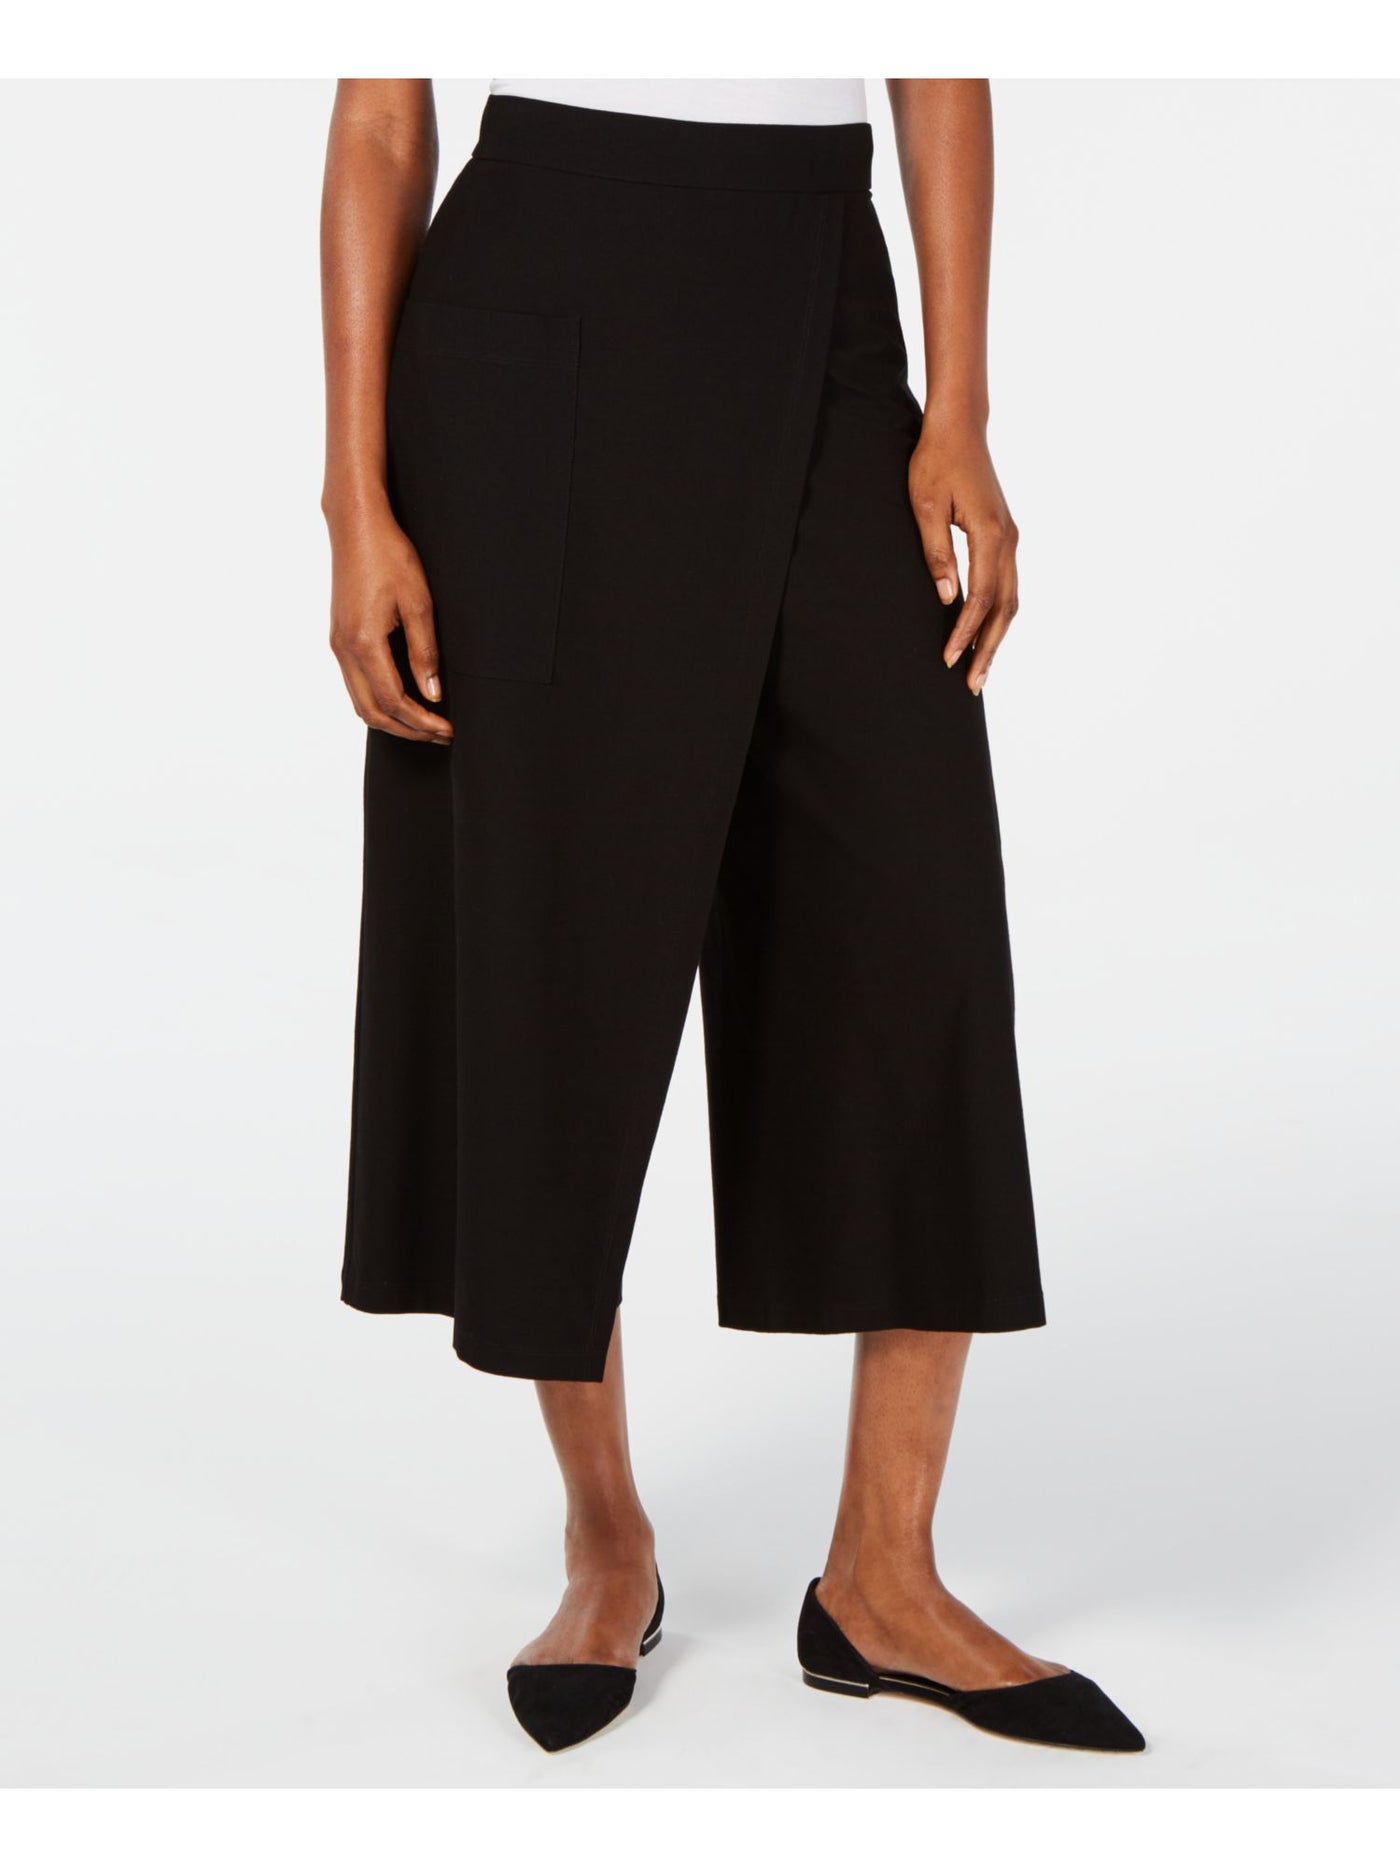 EILEEN FISHER Womens Black Stretch Pocketed Textured Front Overlay Wear To Work Wide Leg Pants S